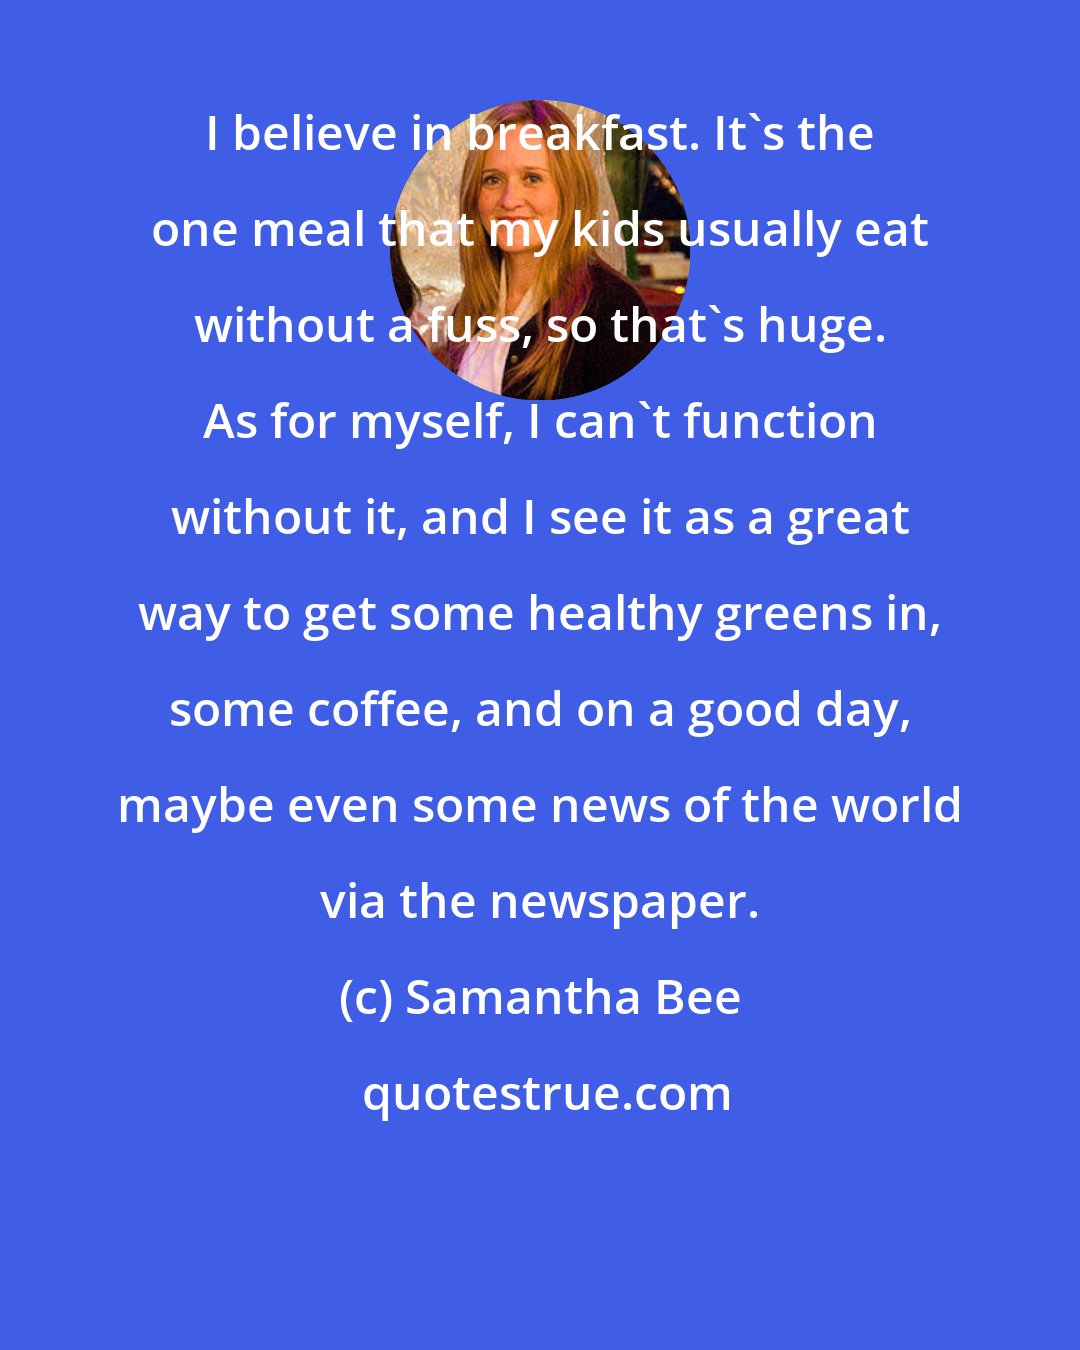 Samantha Bee: I believe in breakfast. It's the one meal that my kids usually eat without a fuss, so that's huge. As for myself, I can't function without it, and I see it as a great way to get some healthy greens in, some coffee, and on a good day, maybe even some news of the world via the newspaper.